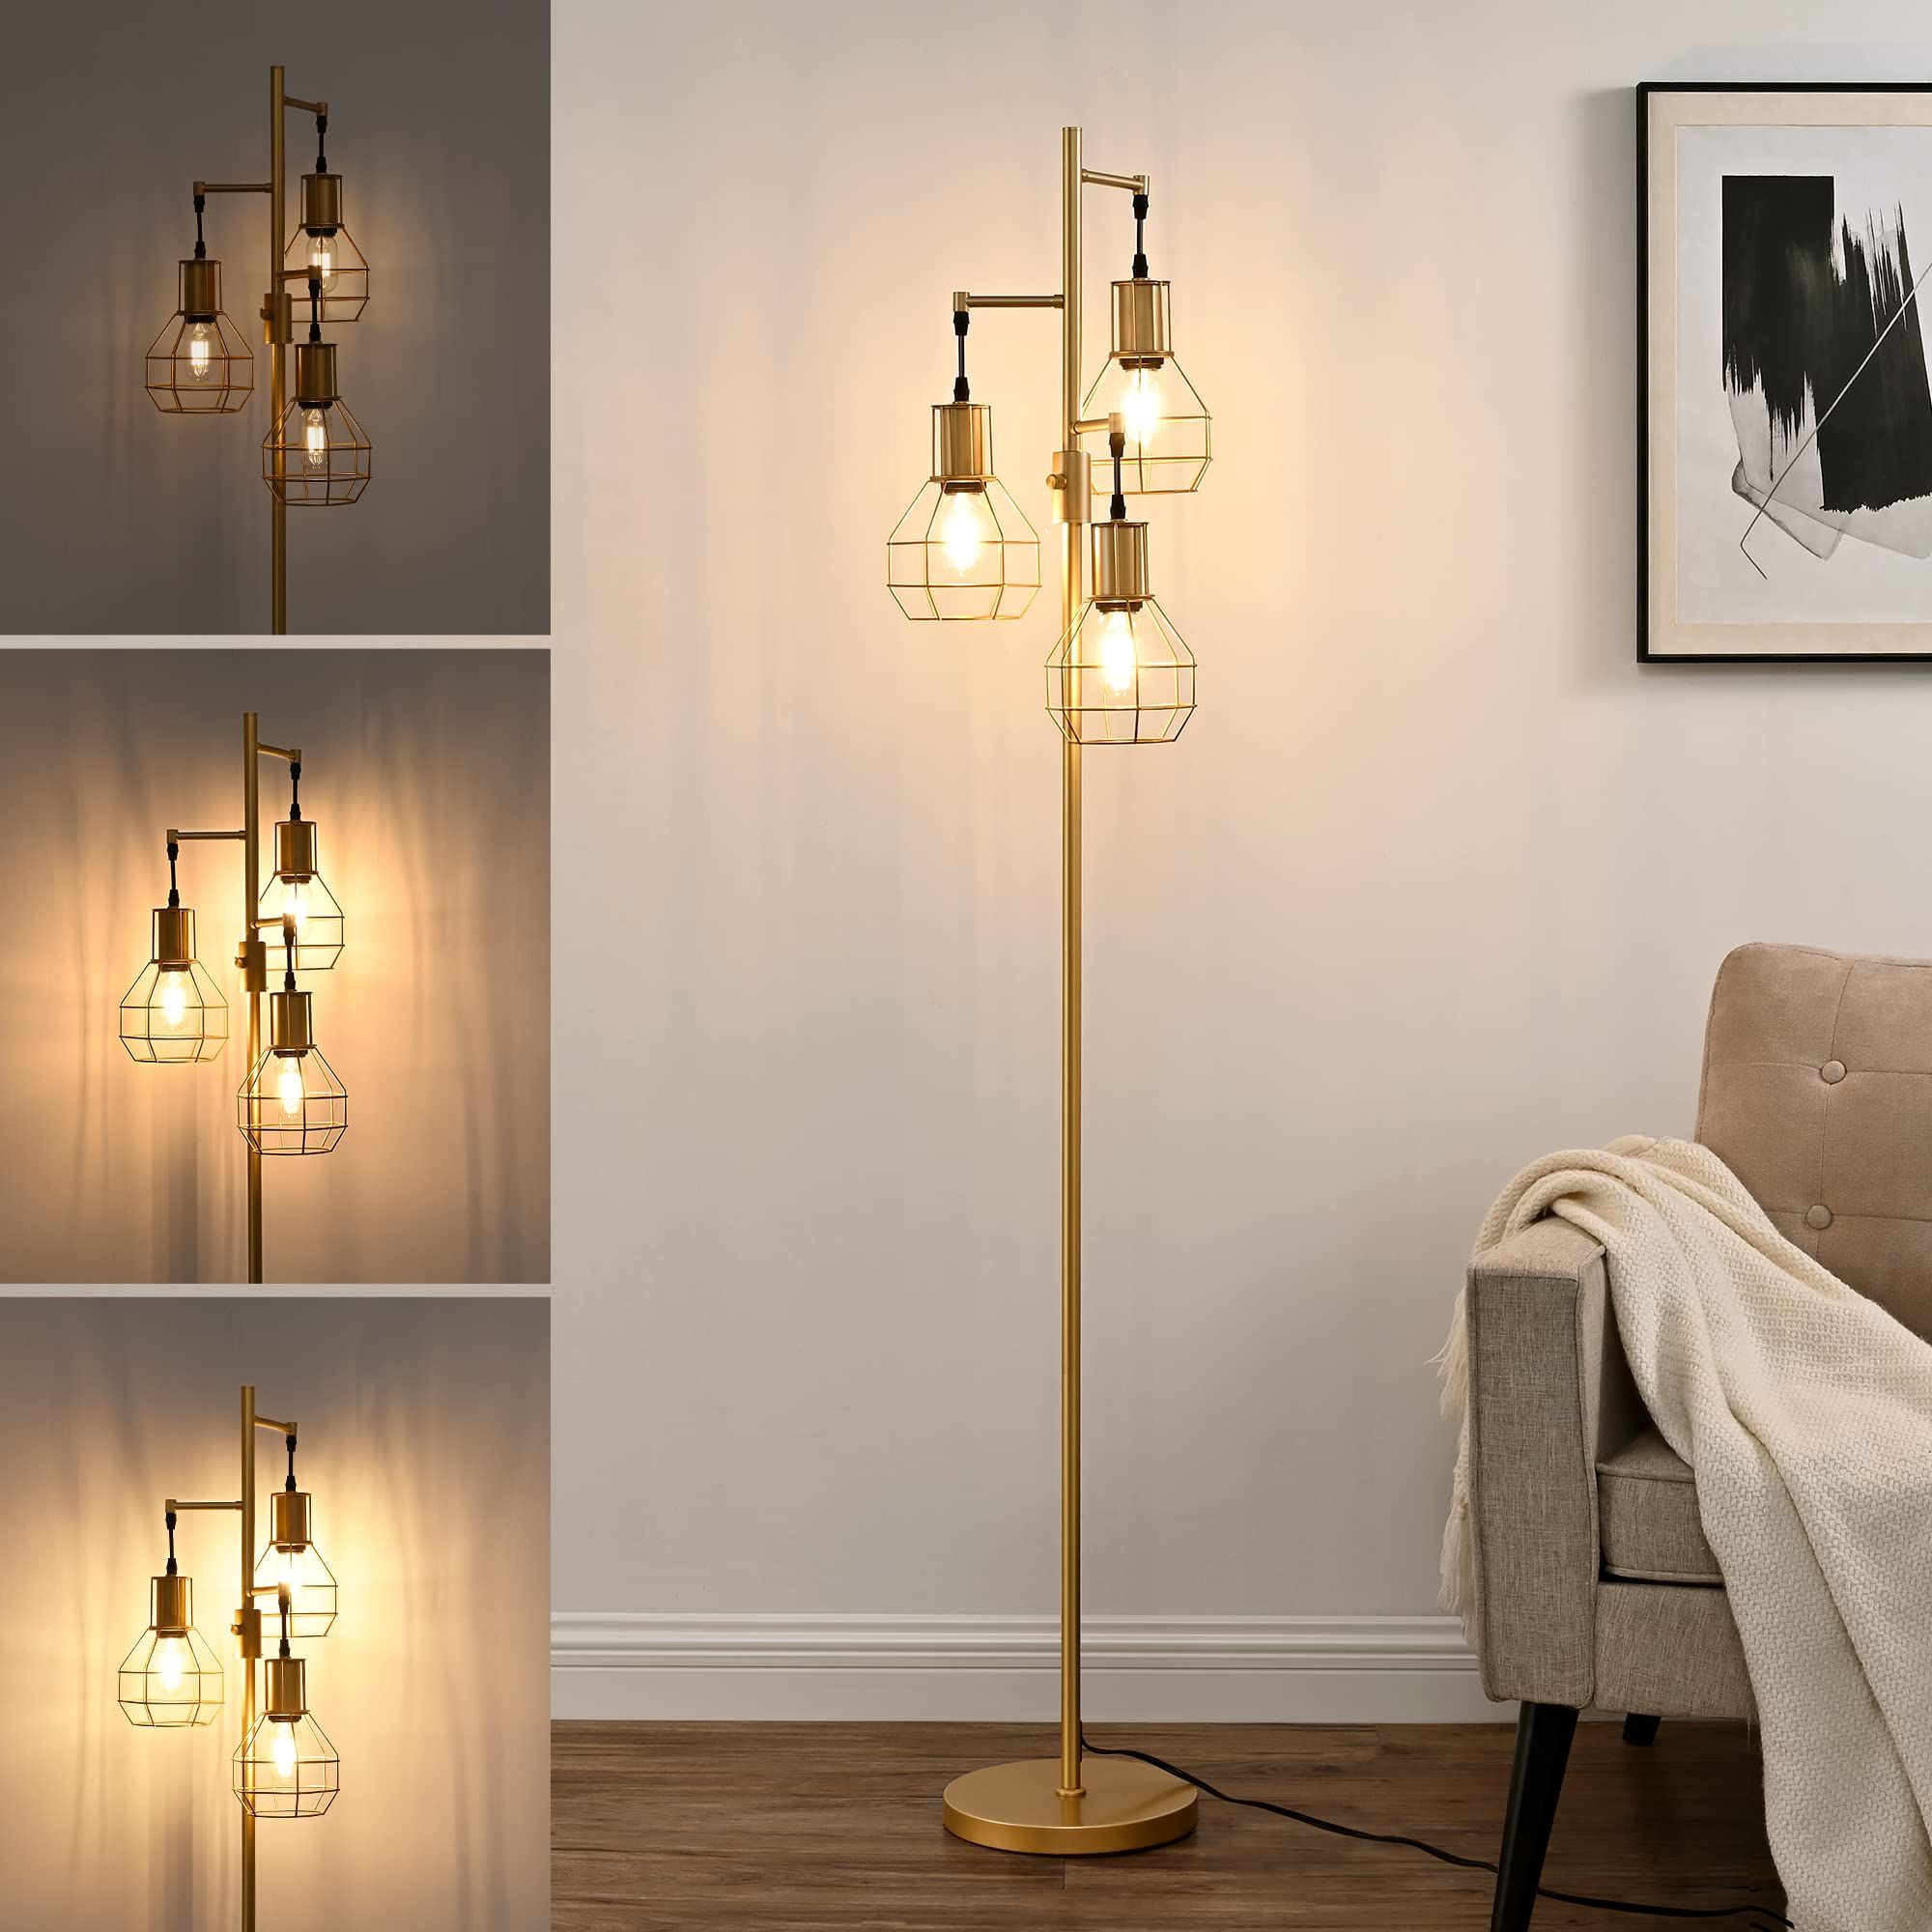 Standing Lamps With Dimmable Led Throughout Recent Amazon: Edishine Gold Floor Lamp For Living Room, Farmhouse Dimmable  Floor Lamps With 3 Led Edison Bulbs, Modern Tall Standing Corner Lamp With  Elegant Metal Heads For Bedroom, Office, Industrial Home Decor : (View 3 of 15)